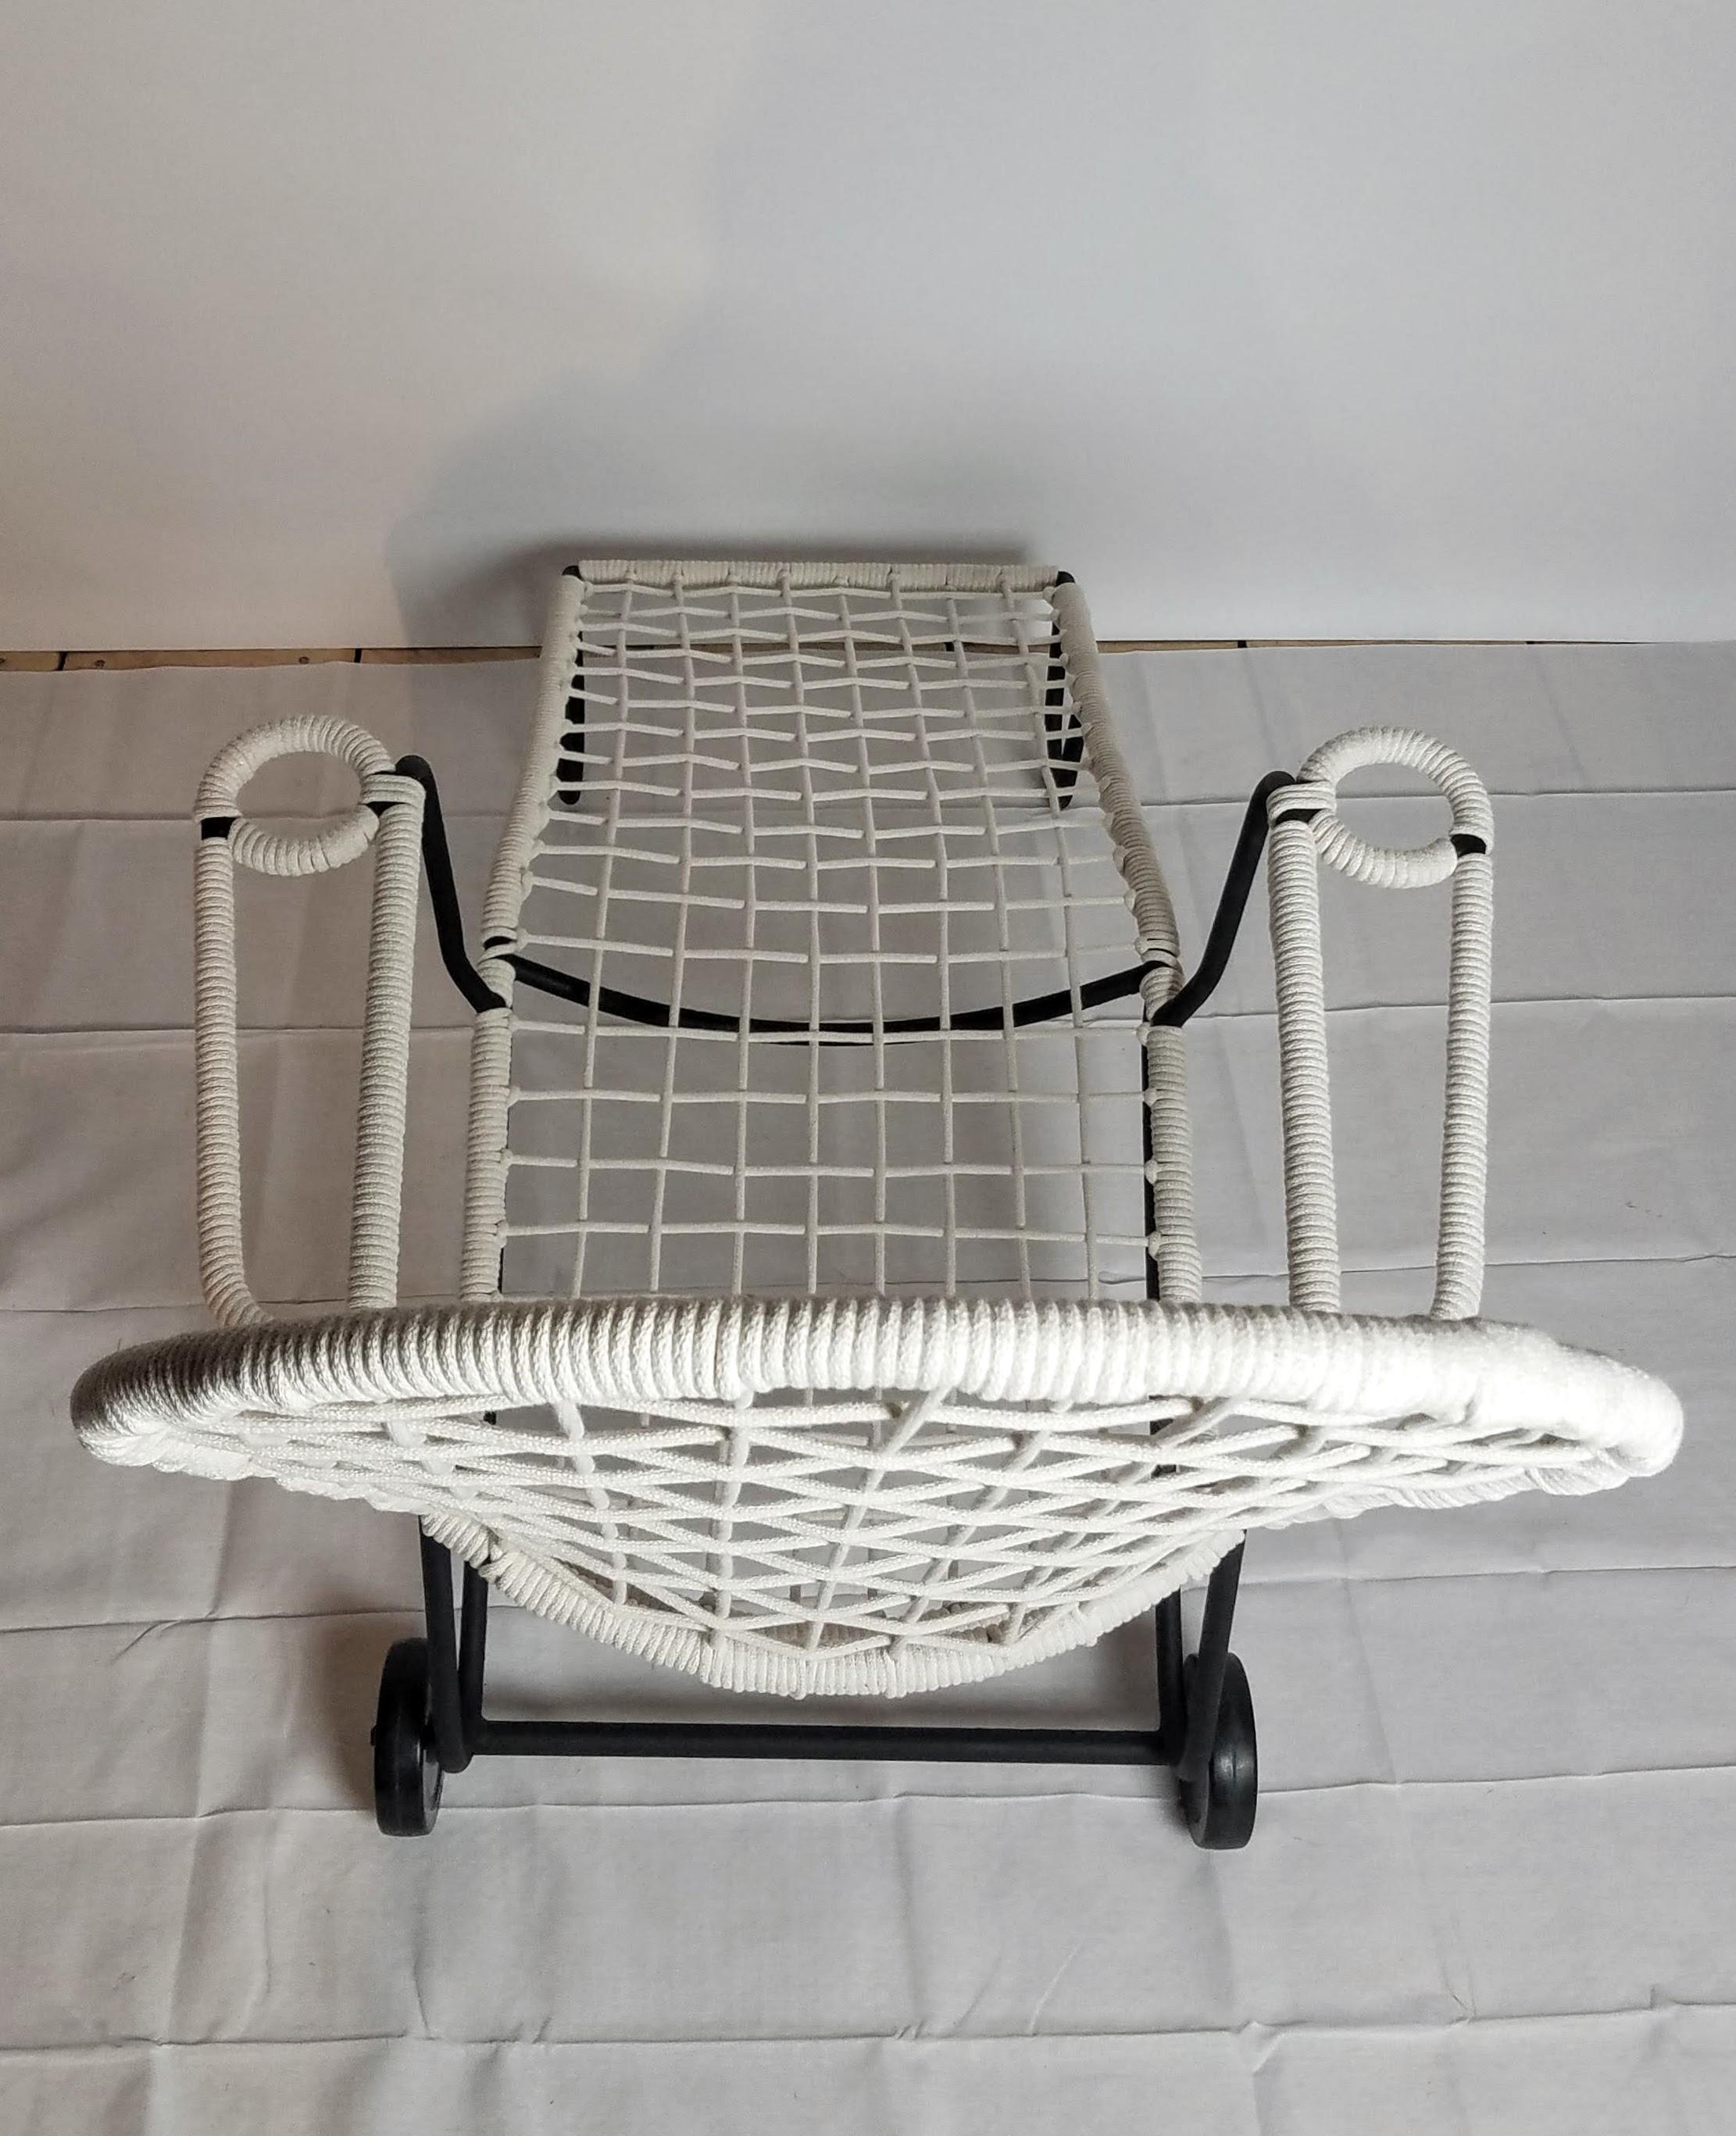 American Wylie R. Dallas Texas Roped Iron Furniture Chaise 1940s San Antonio Texas For Sale